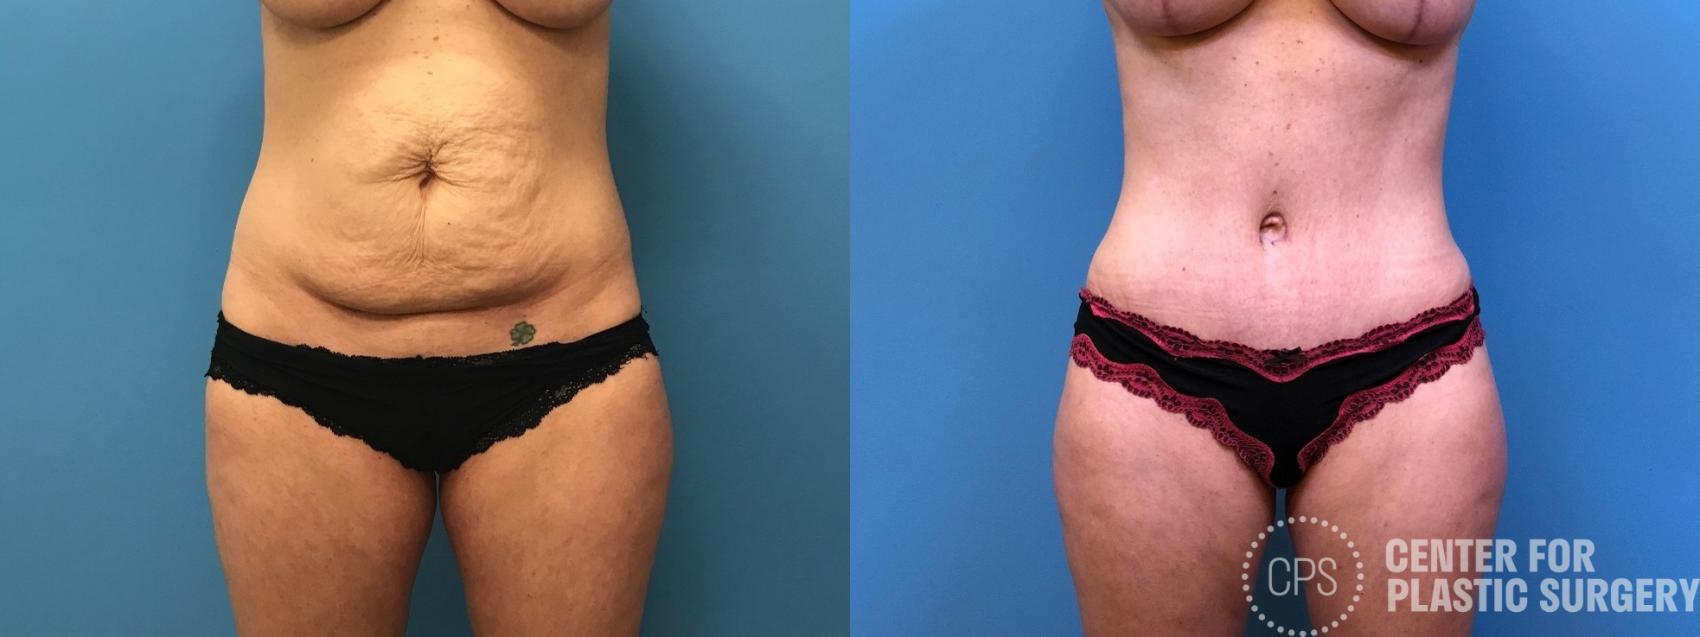 Tummy Tuck Case 244 Before & After Front | Chevy Chase & Annandale, Washington D.C. Metropolitan Area | Center for Plastic Surgery